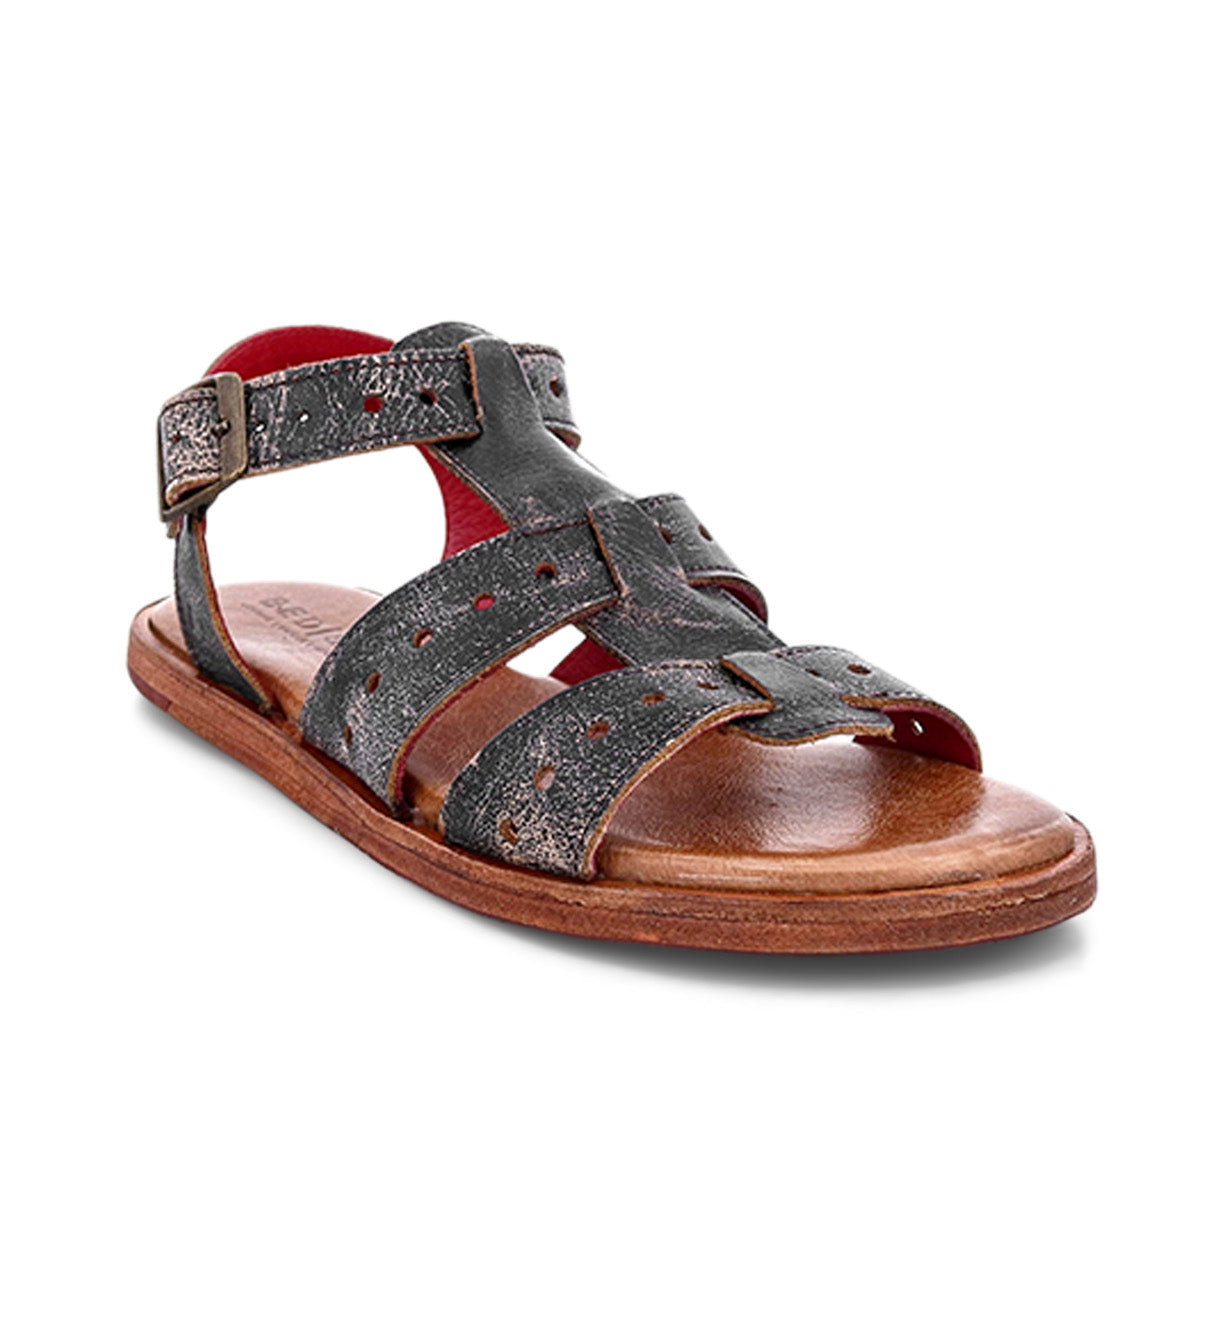 Men's black leather sandals with red straps, named Sue by Bed Stu.